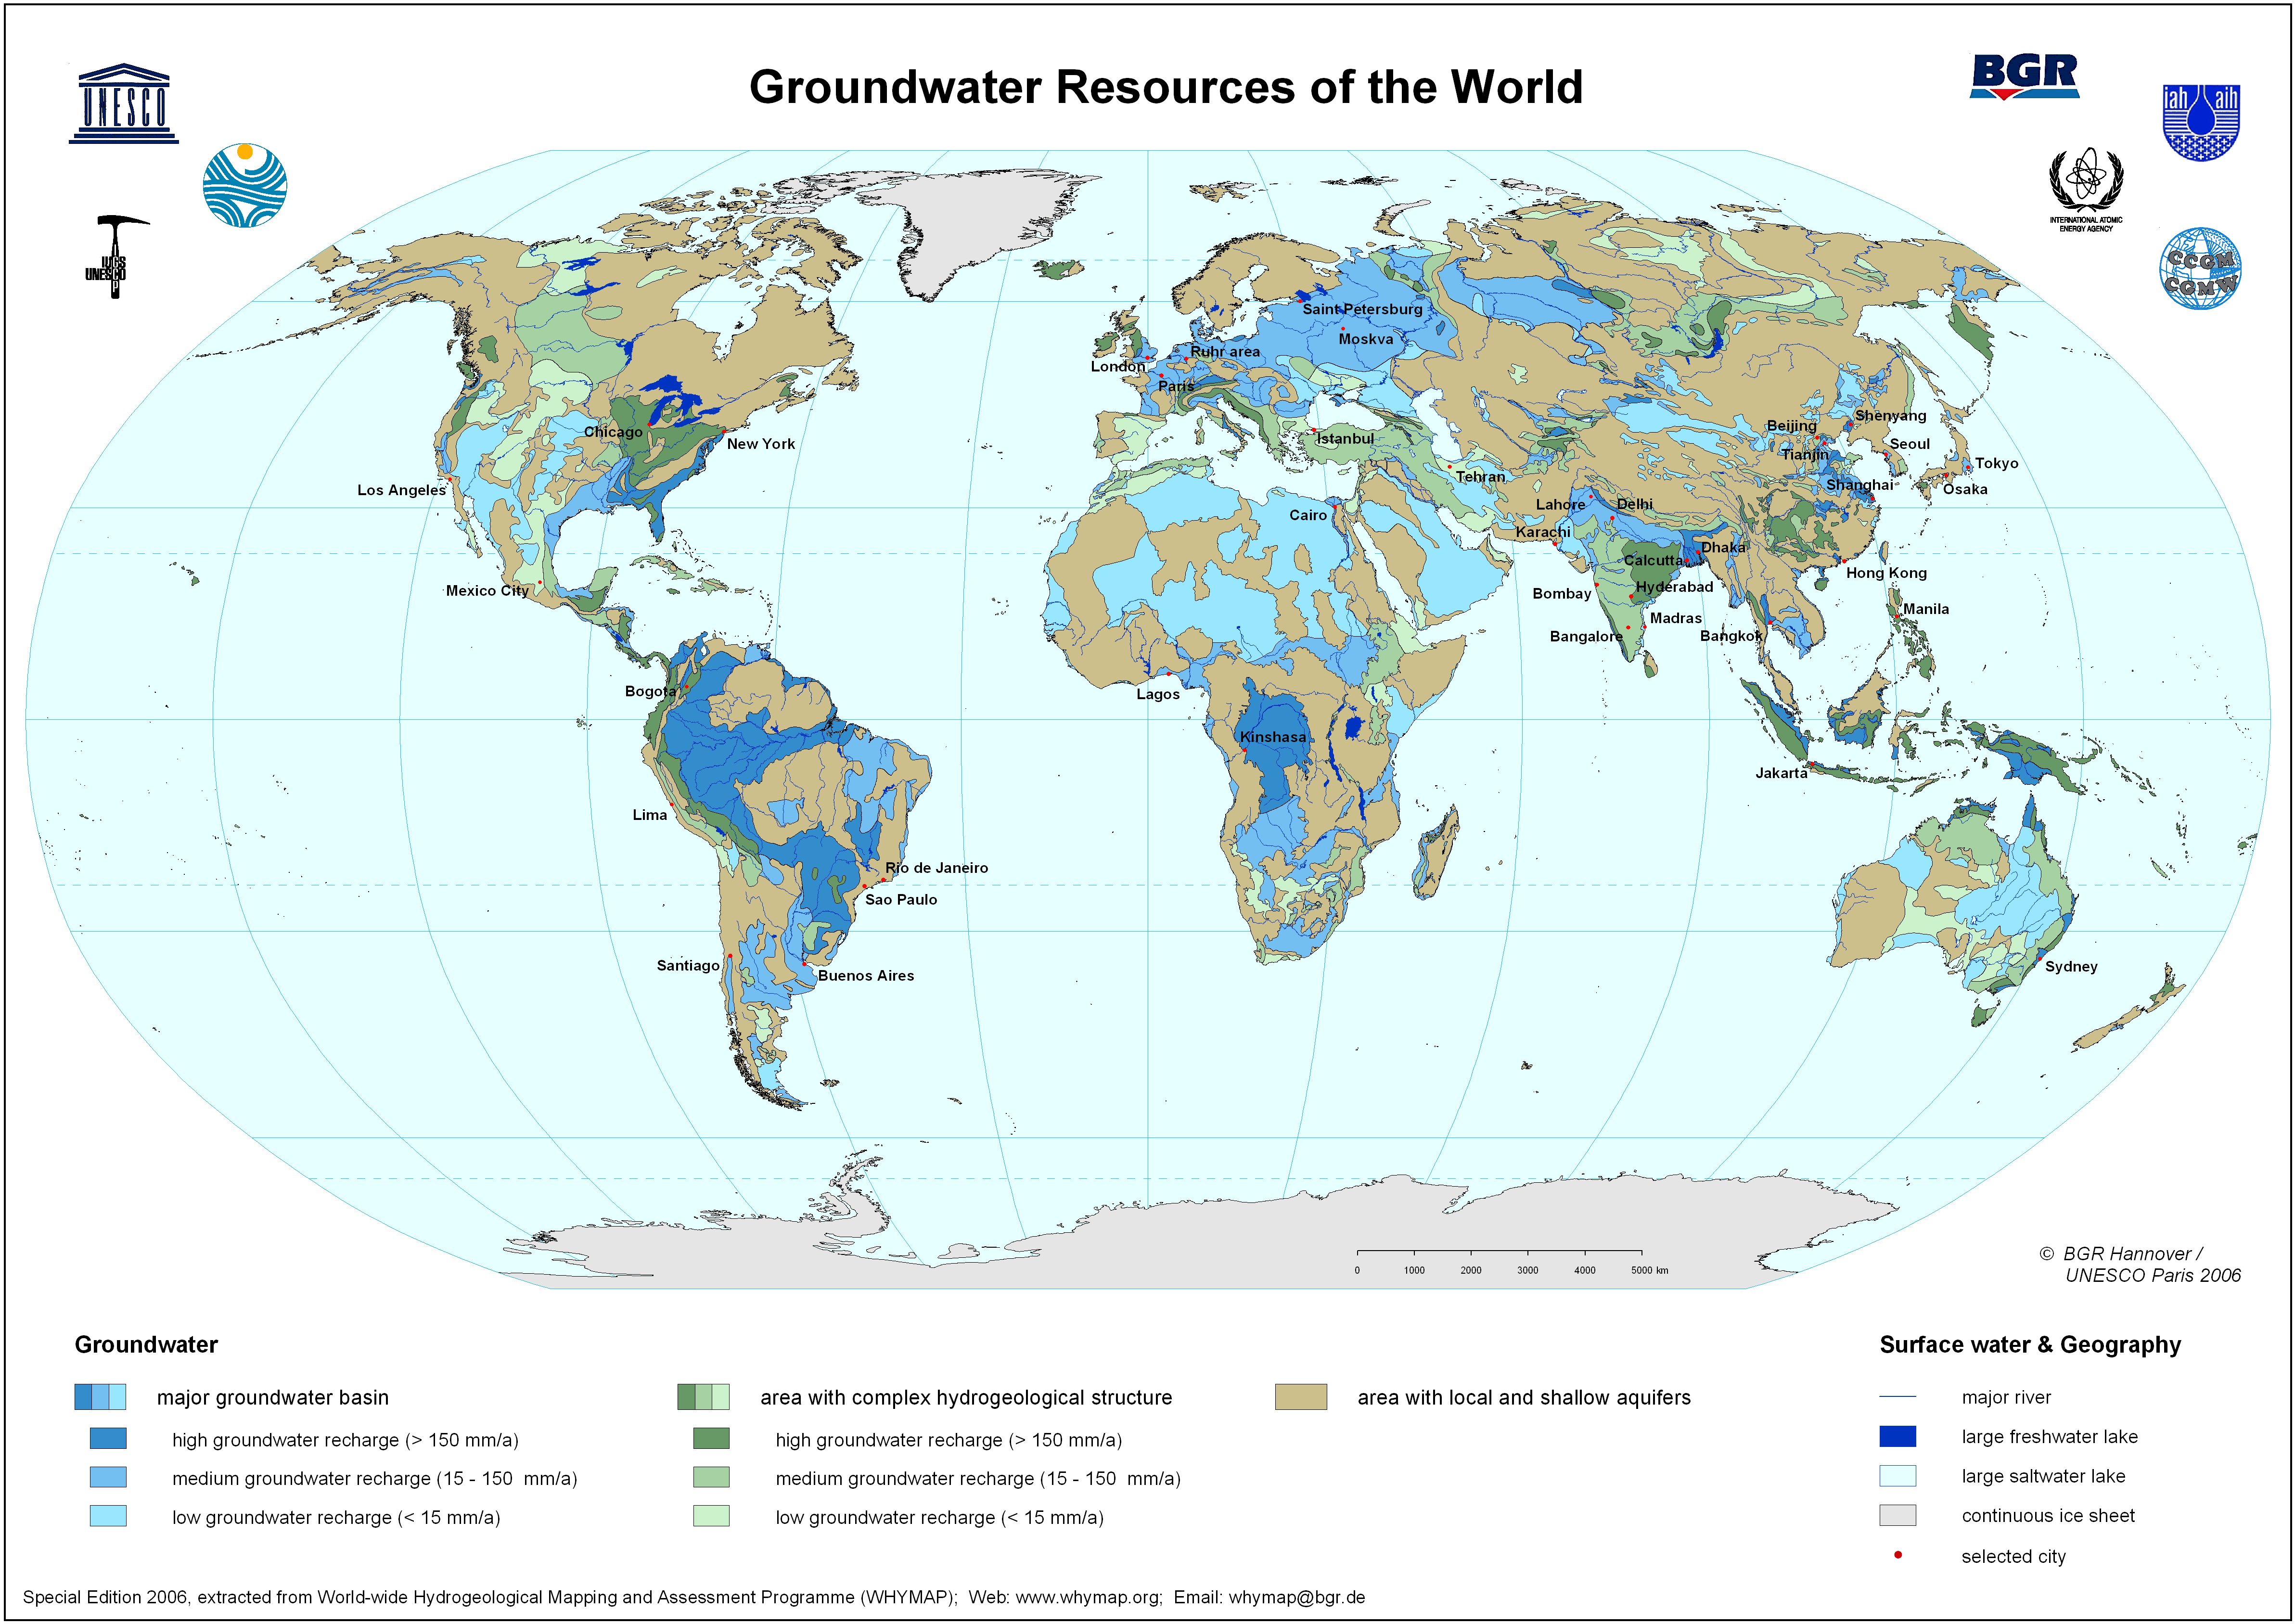 Map of groundwater resources of the world